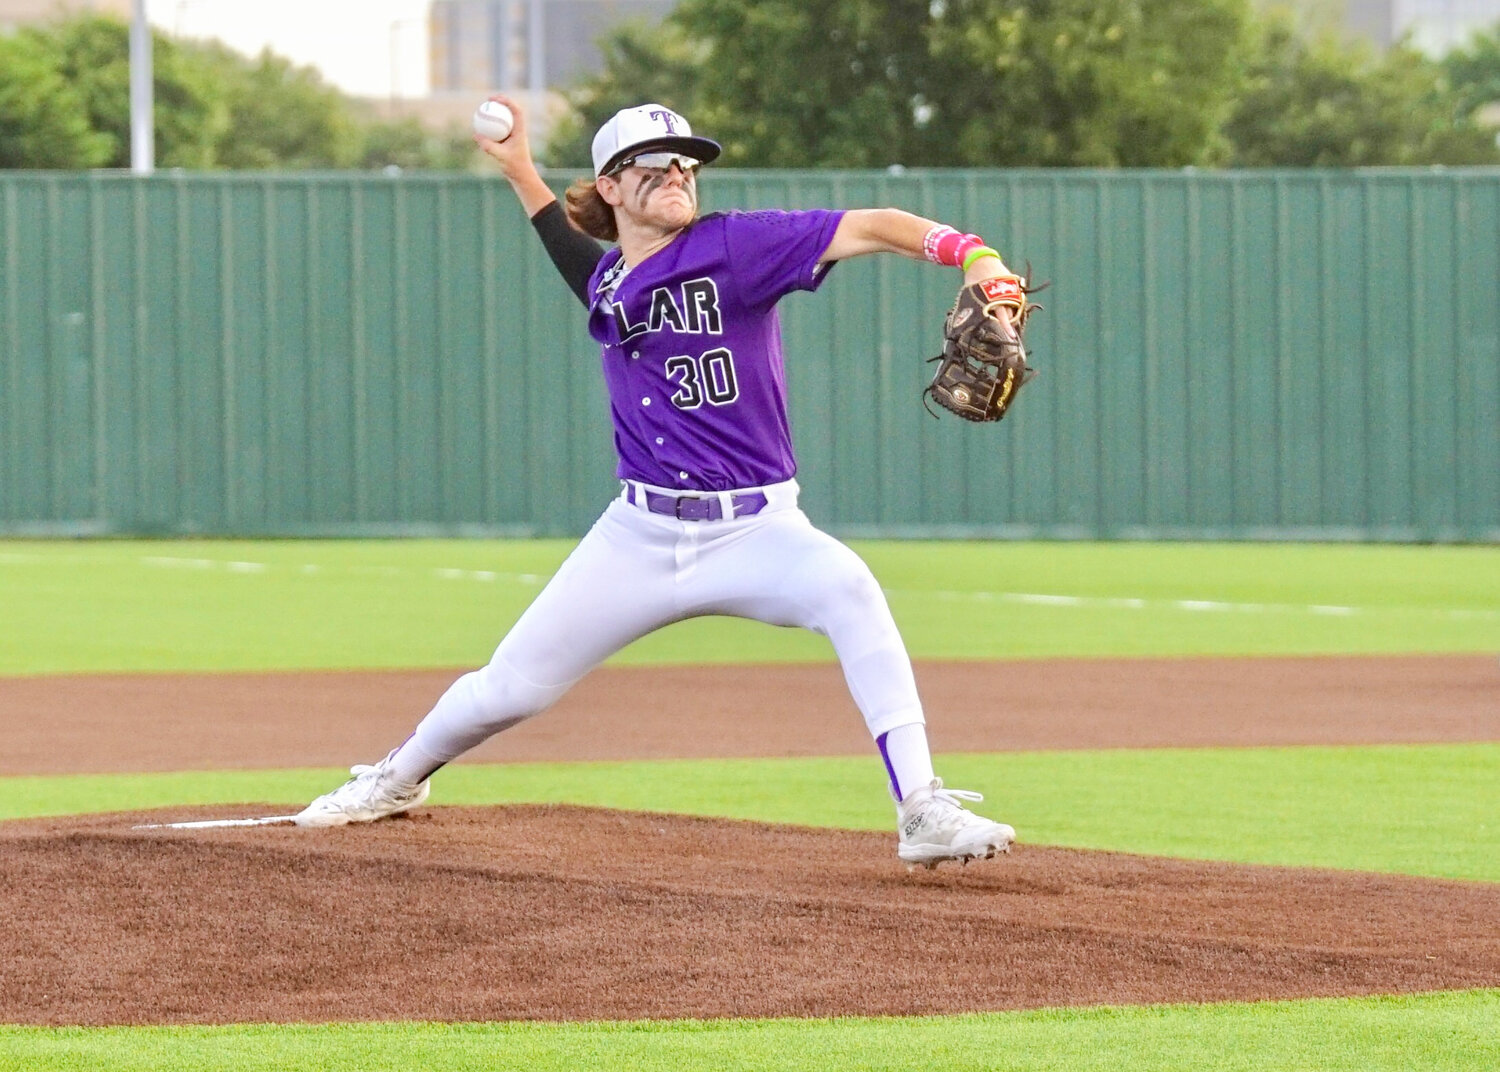 Talan Brown of the Tolar Rattlers pitched the second perfect game of his high school career as the Rattlers defeated Ranger 19-0.